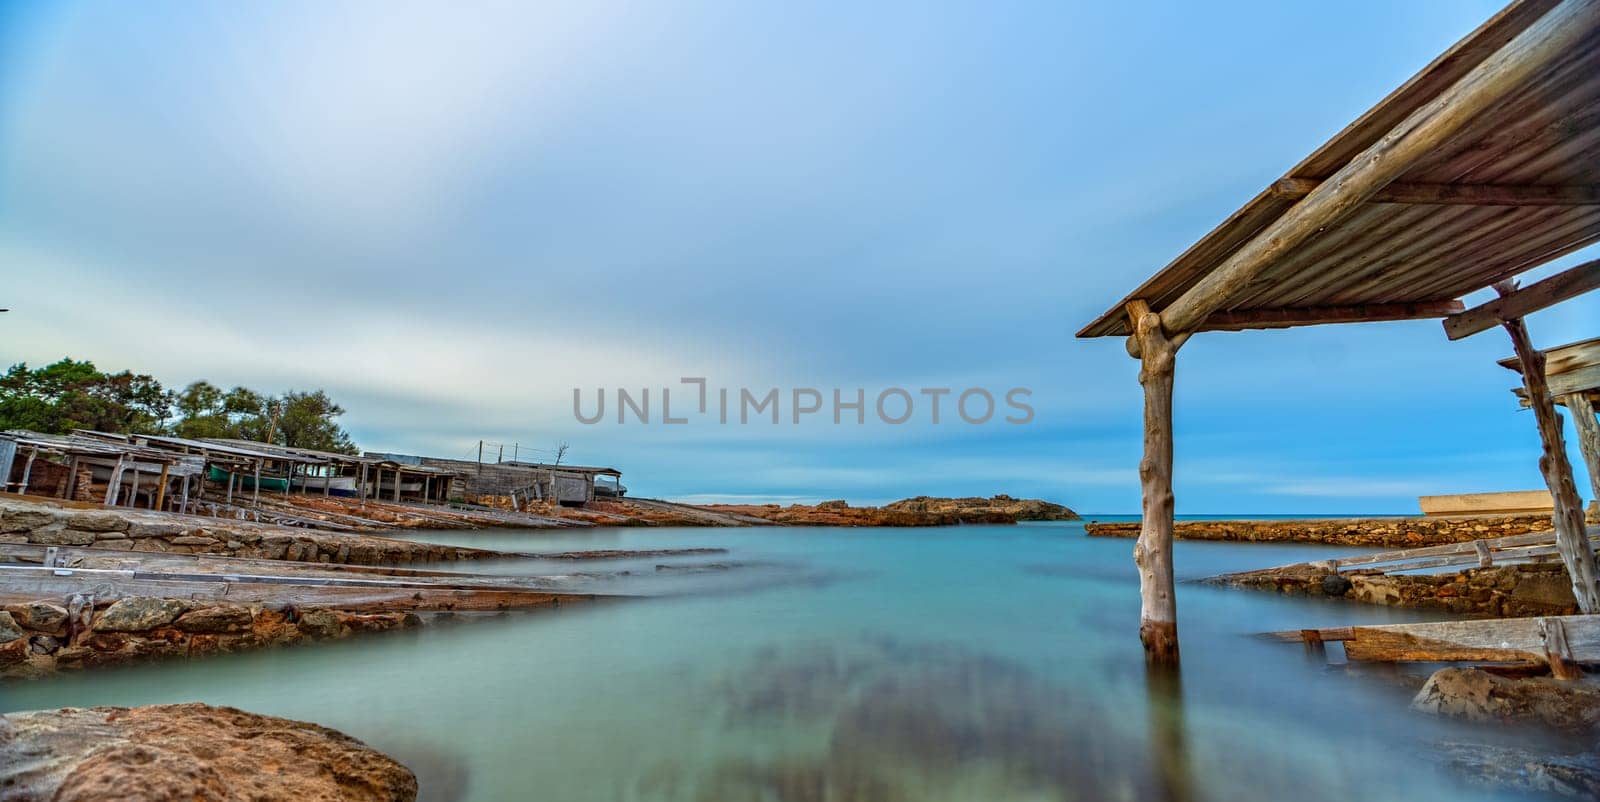 Long Exposure of Old Dock with Rails Leading to Clear Sea by FerradalFCG